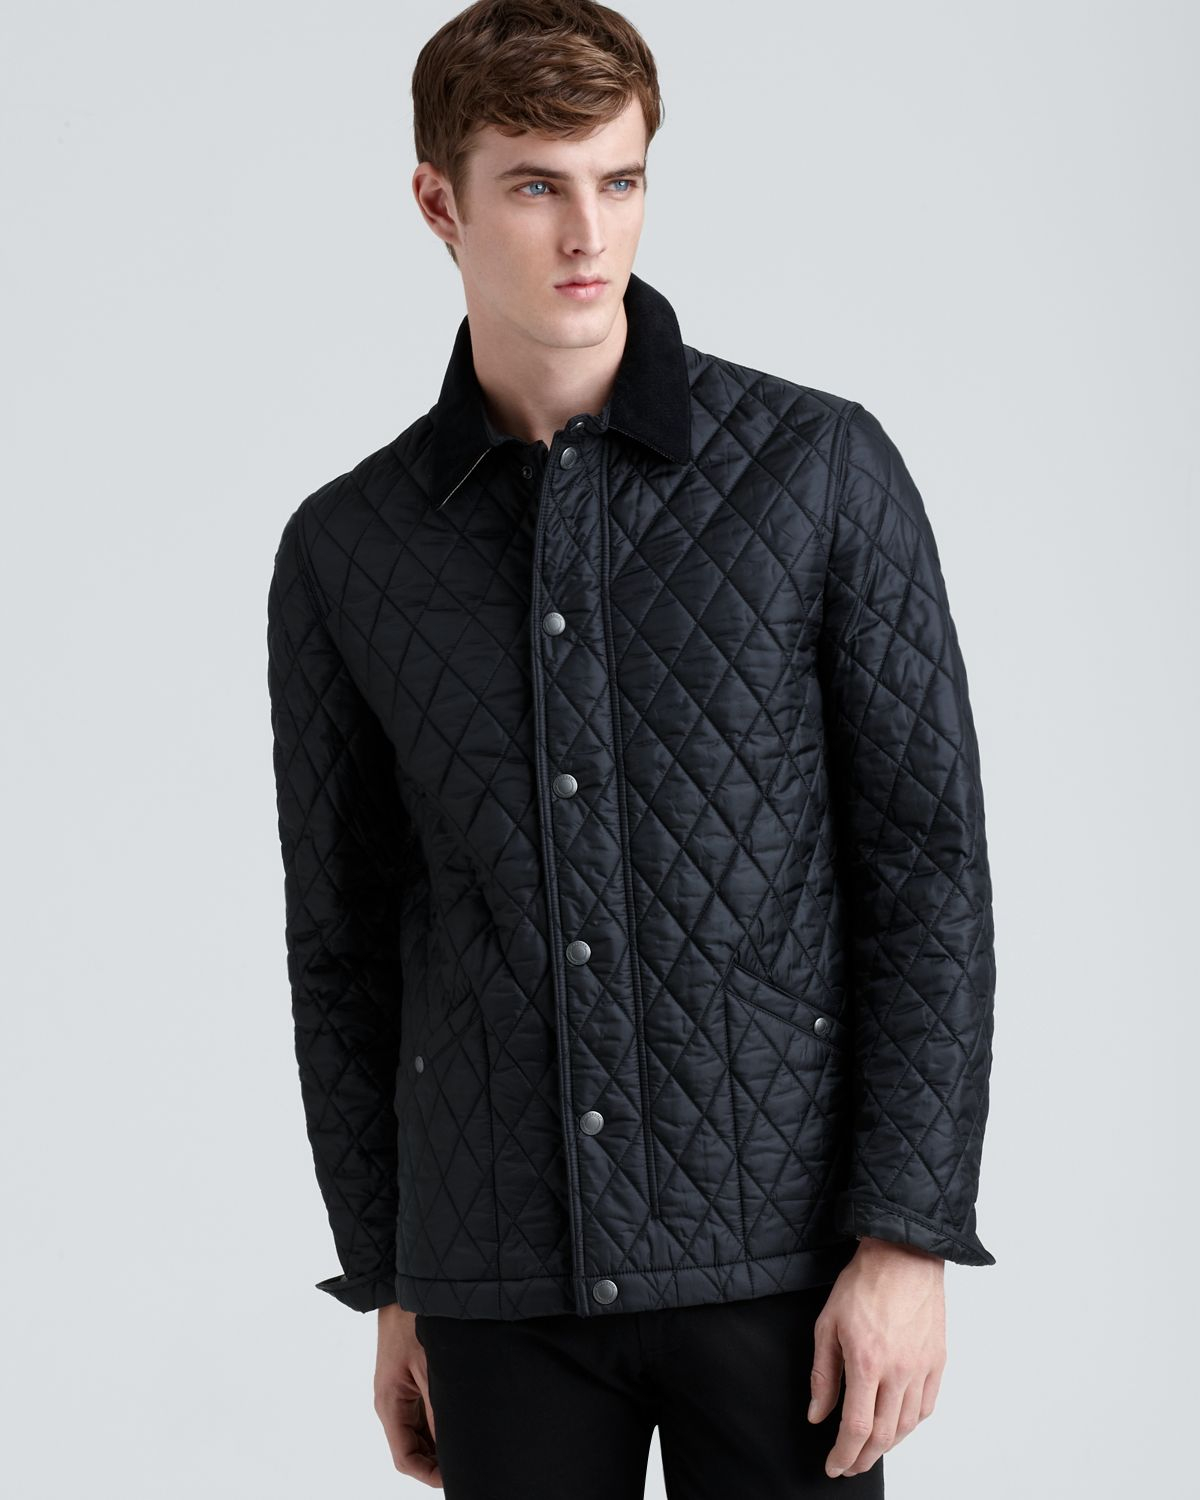 Lyst - Burberry Roden Quilted Barn Jacket in Black for Men